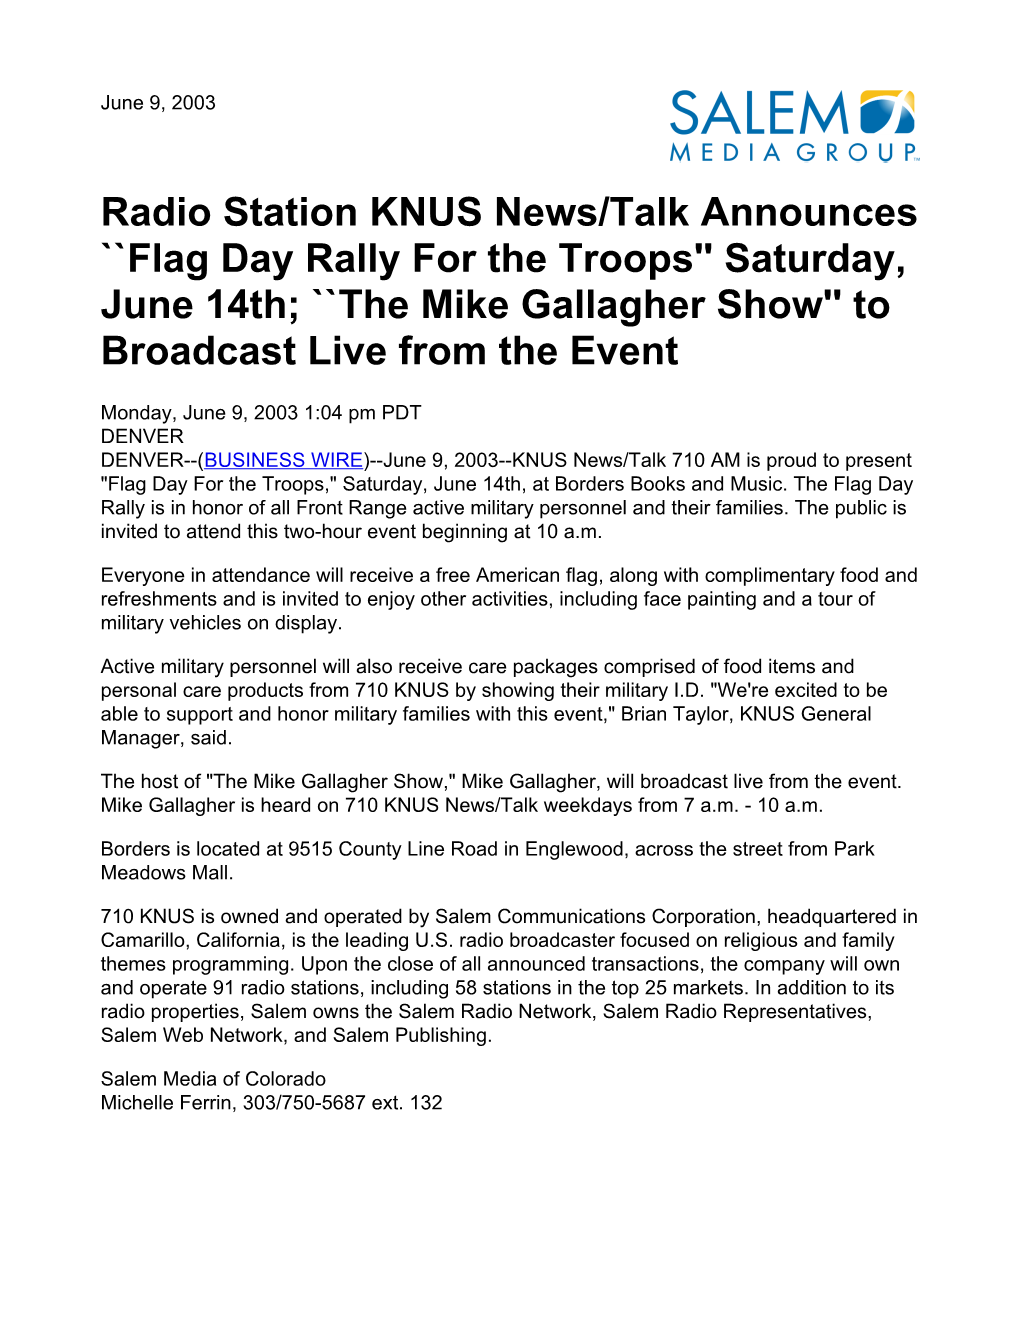 Radio Station KNUS News/Talk Announces ``Flag Day Rally for the Troops'' Saturday, June 14Th; ``The Mike Gallagher Show'' to Broadcast Live from the Event